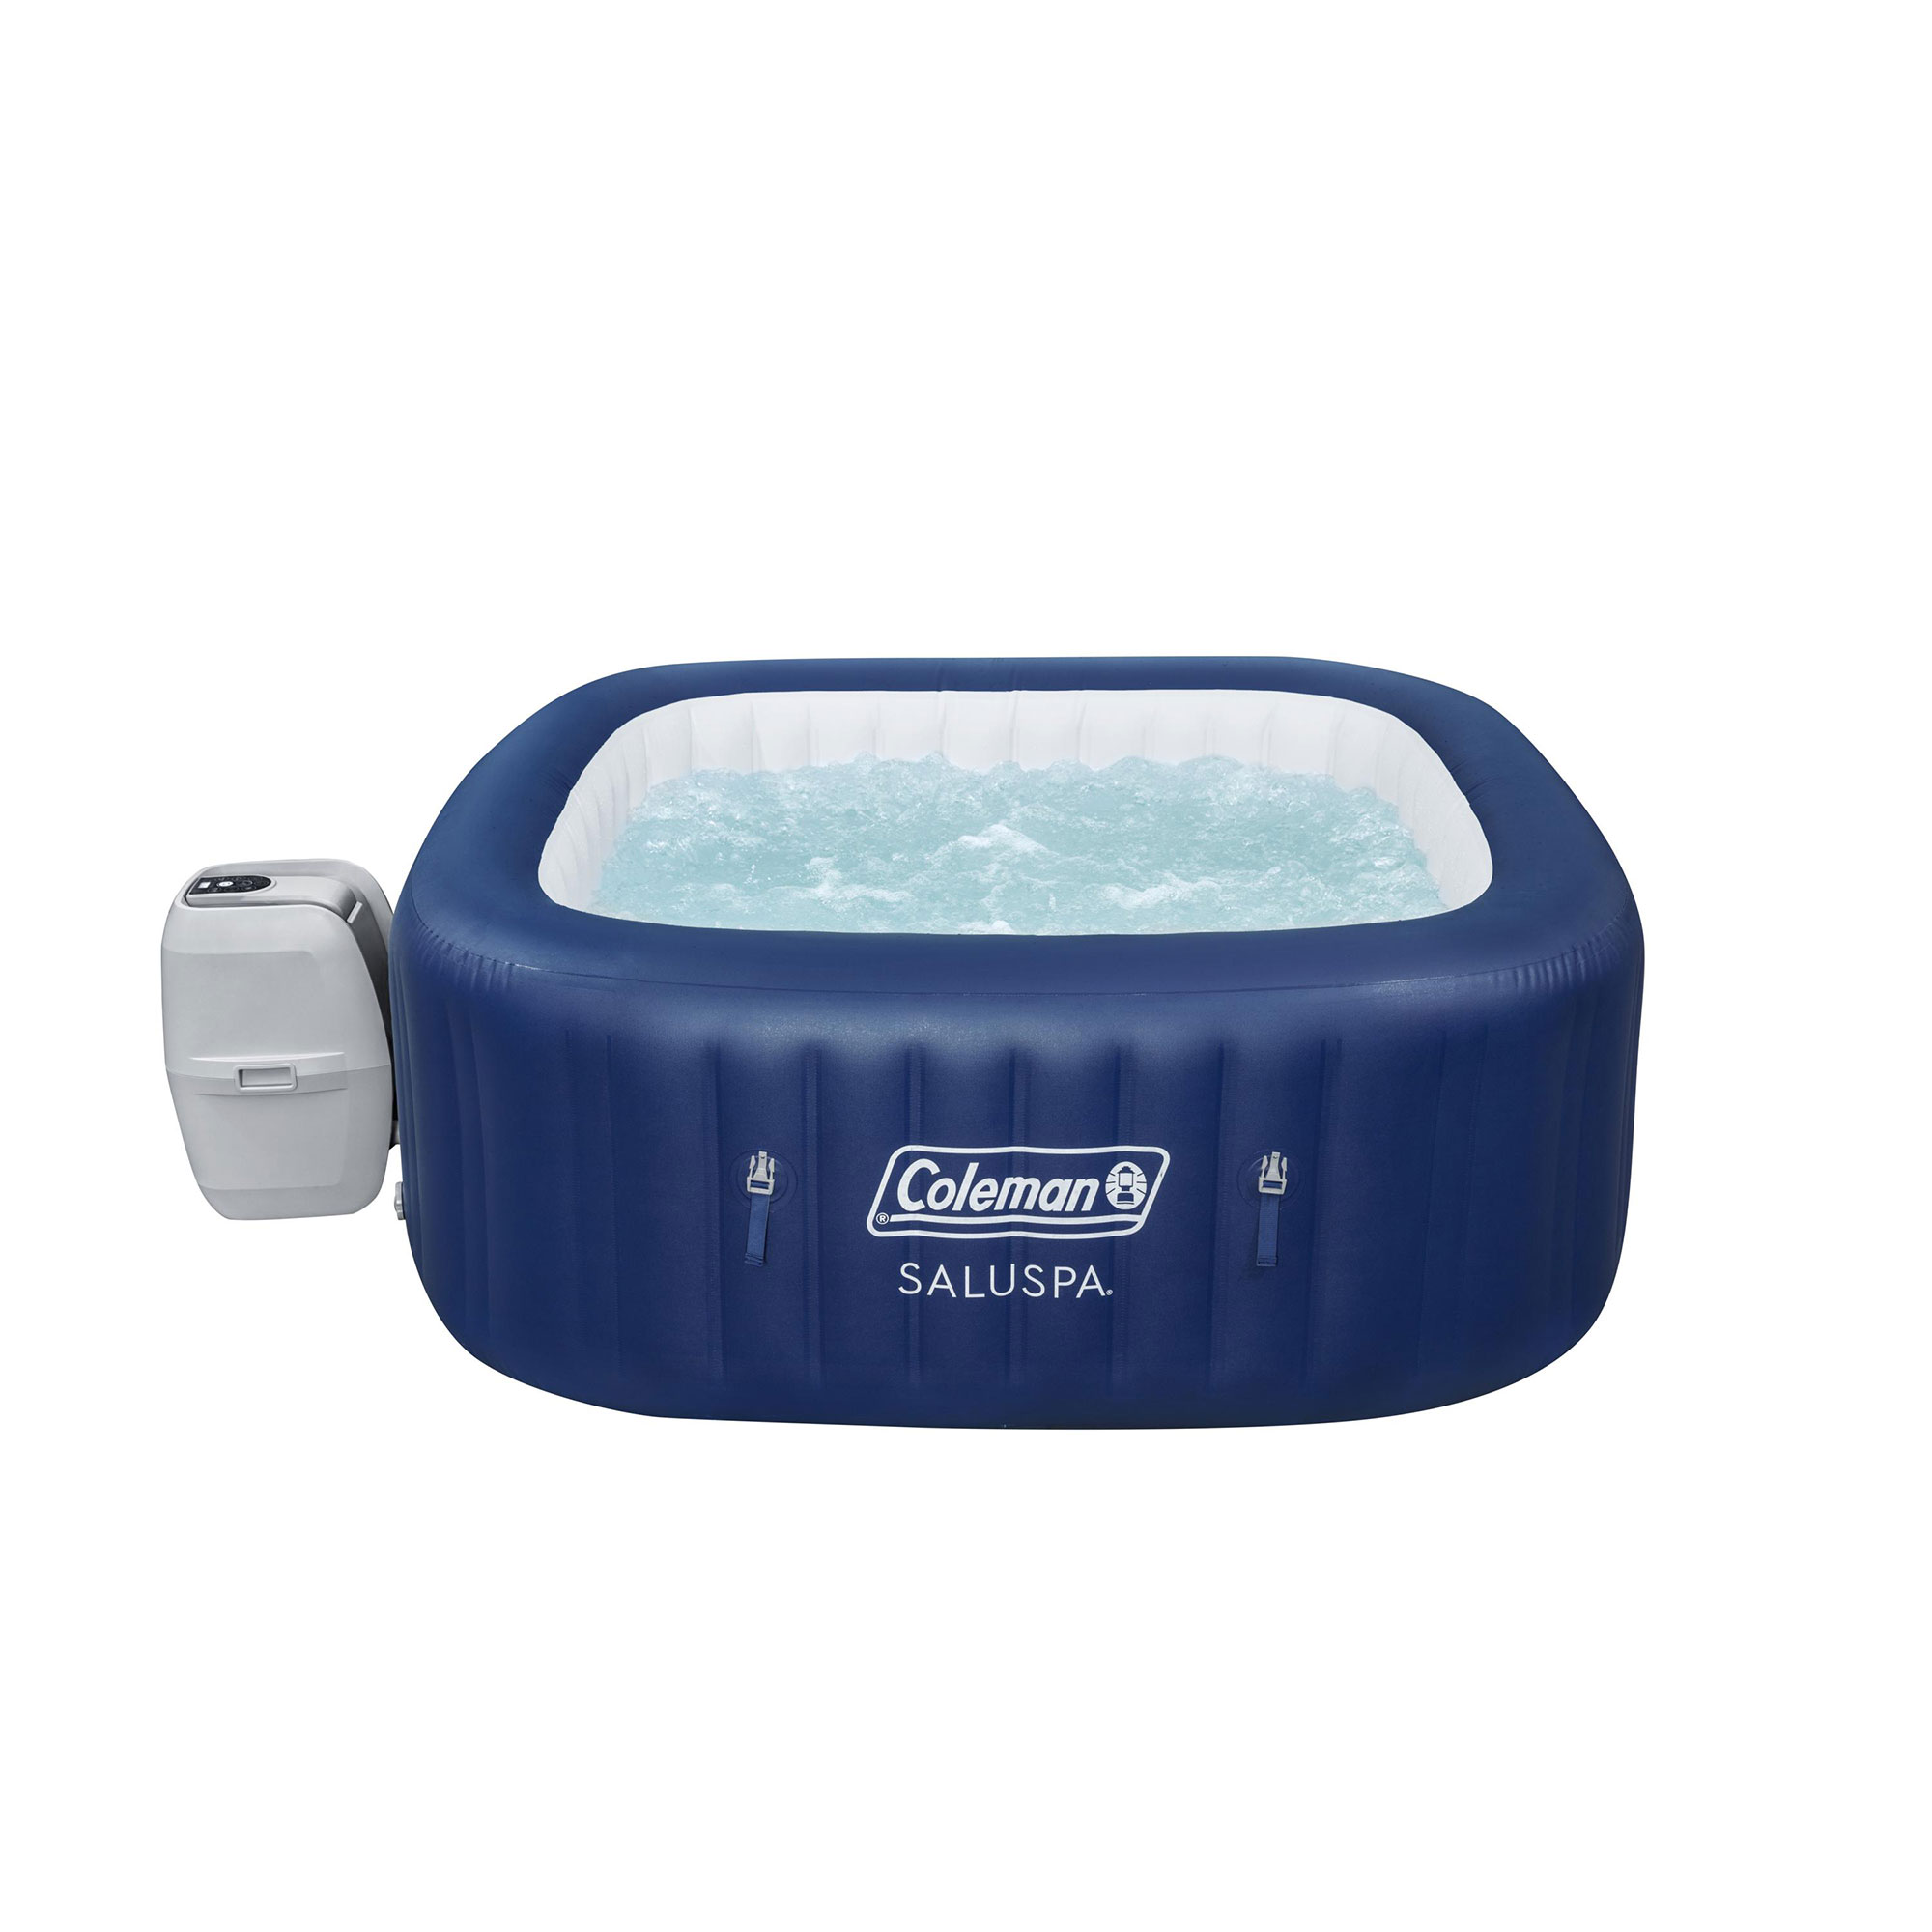 Coleman SaluSpa Atlantis AirJet Inflatable Hot Tub with 140 Soothing Jets - image 3 of 10